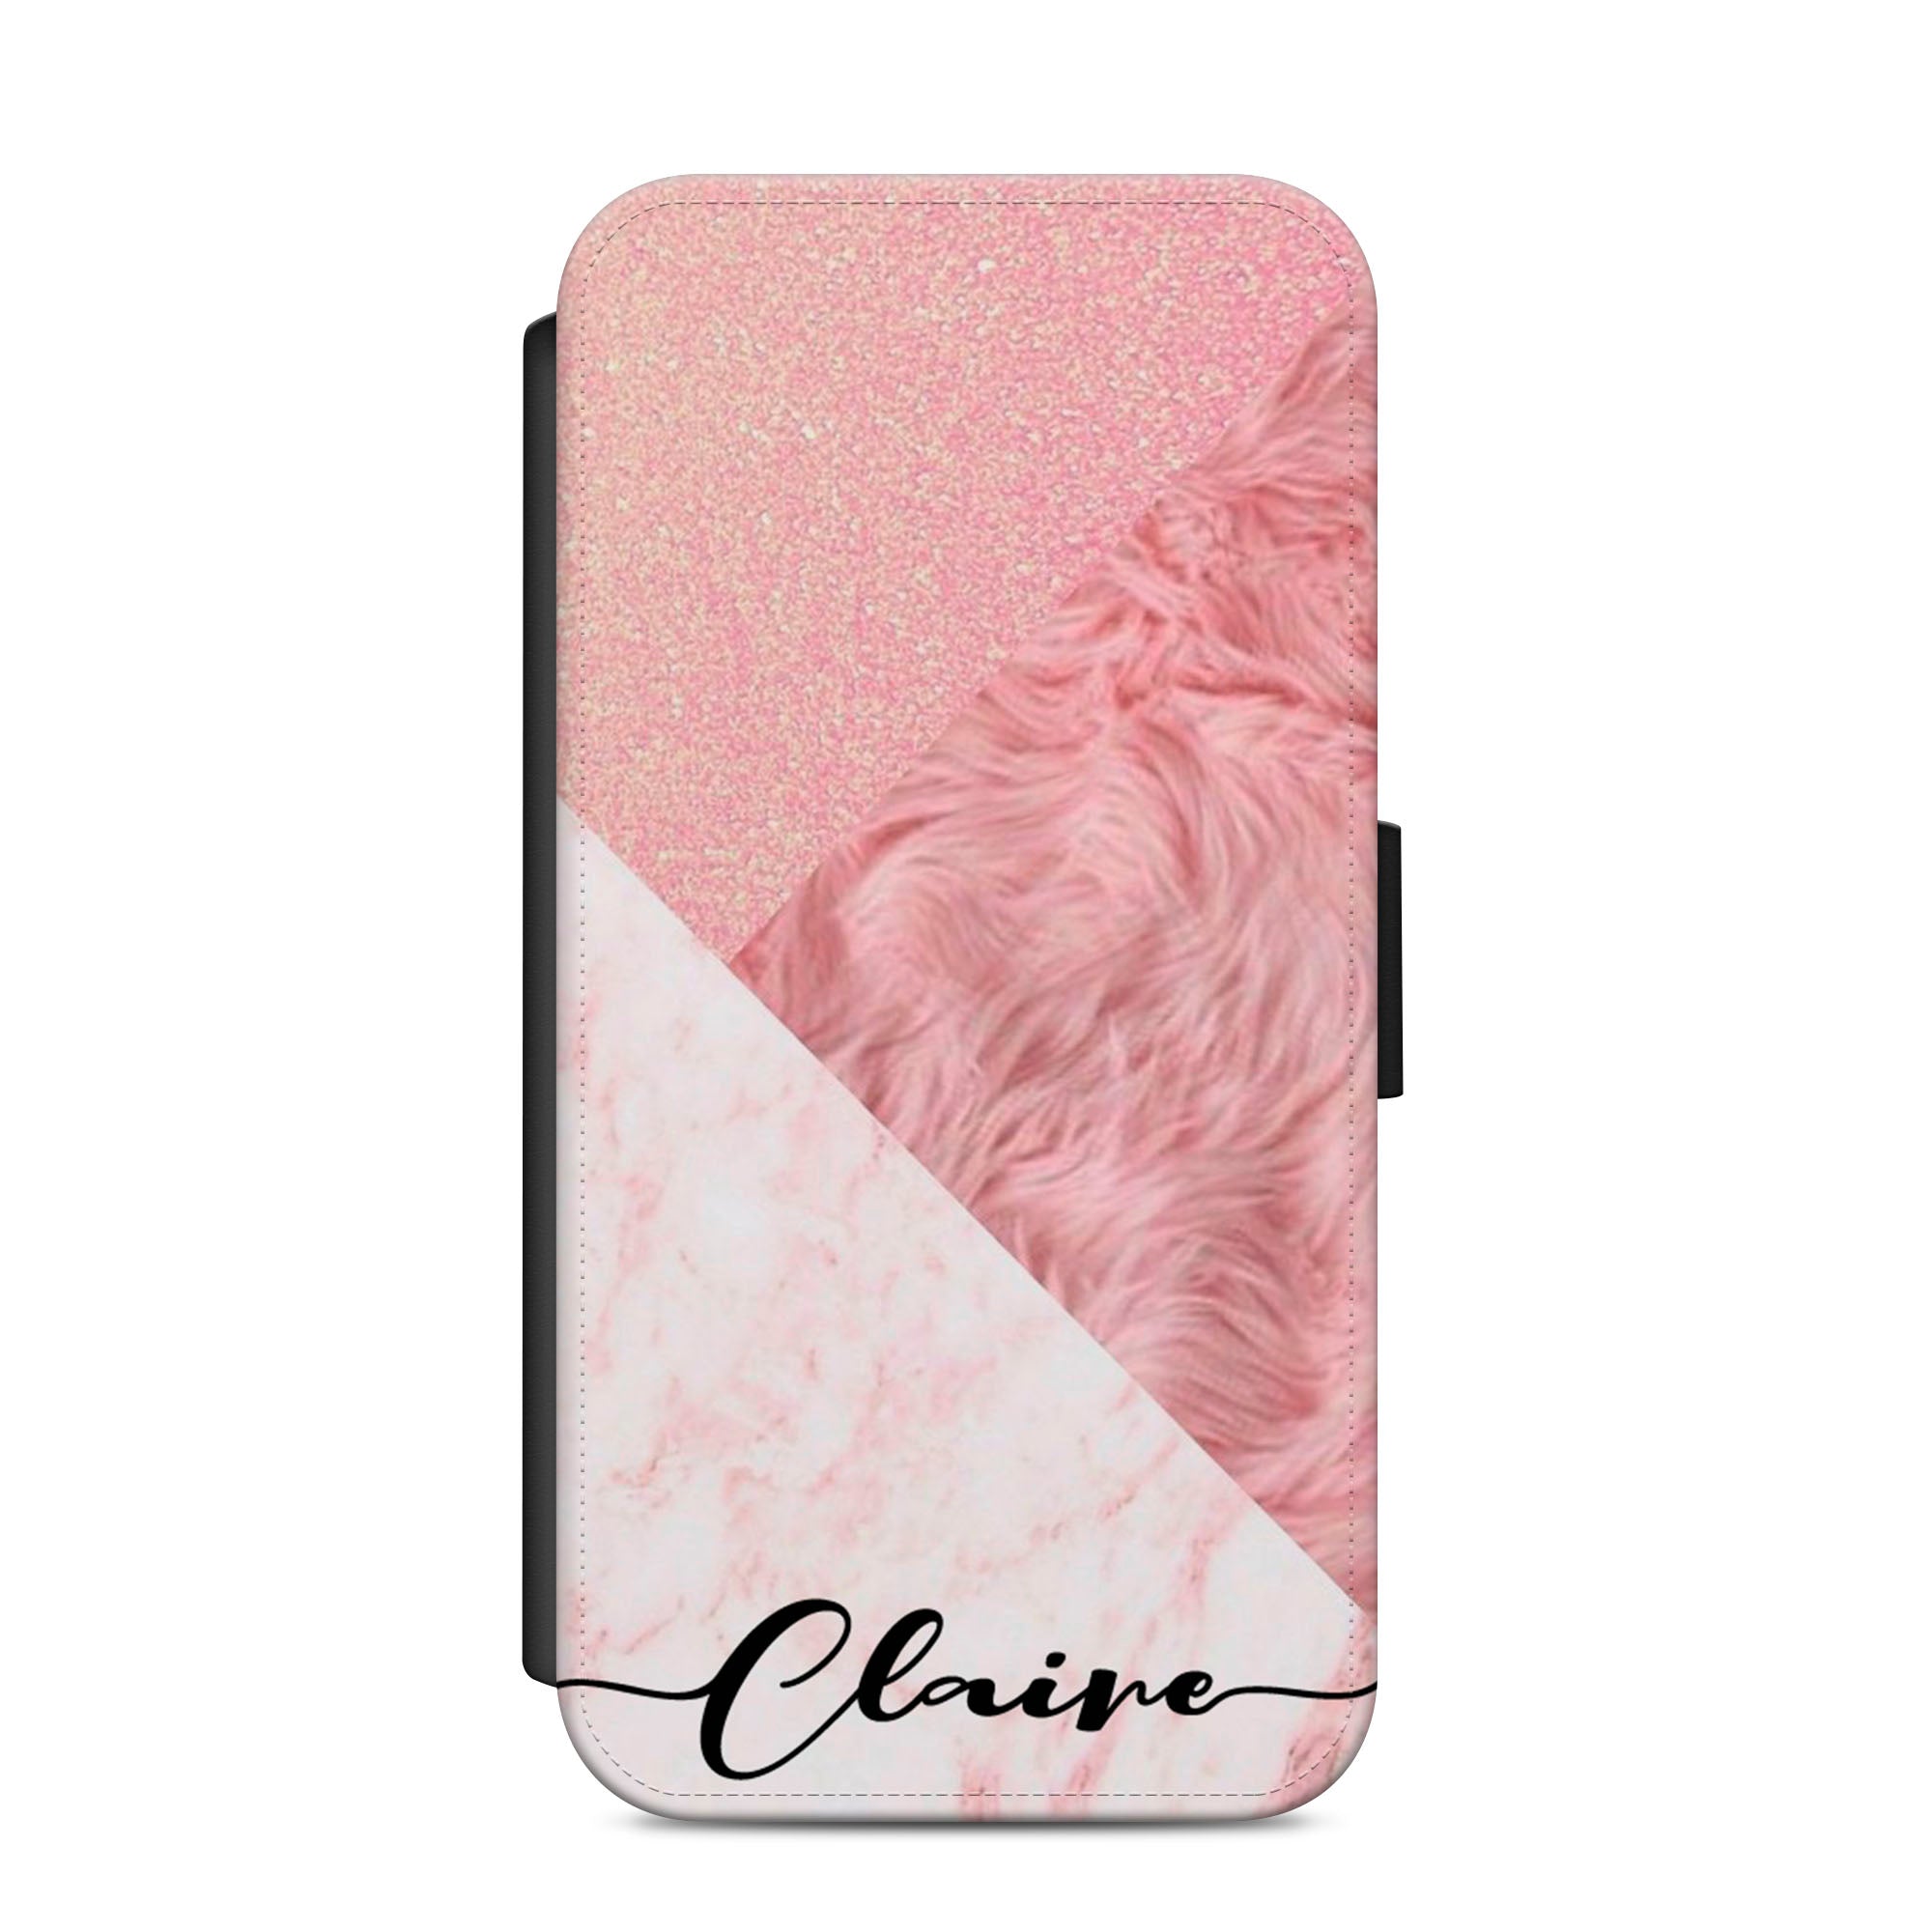 Personalised Pink Fur Faux Leather Flip Case Wallet for iPhone / Samsung